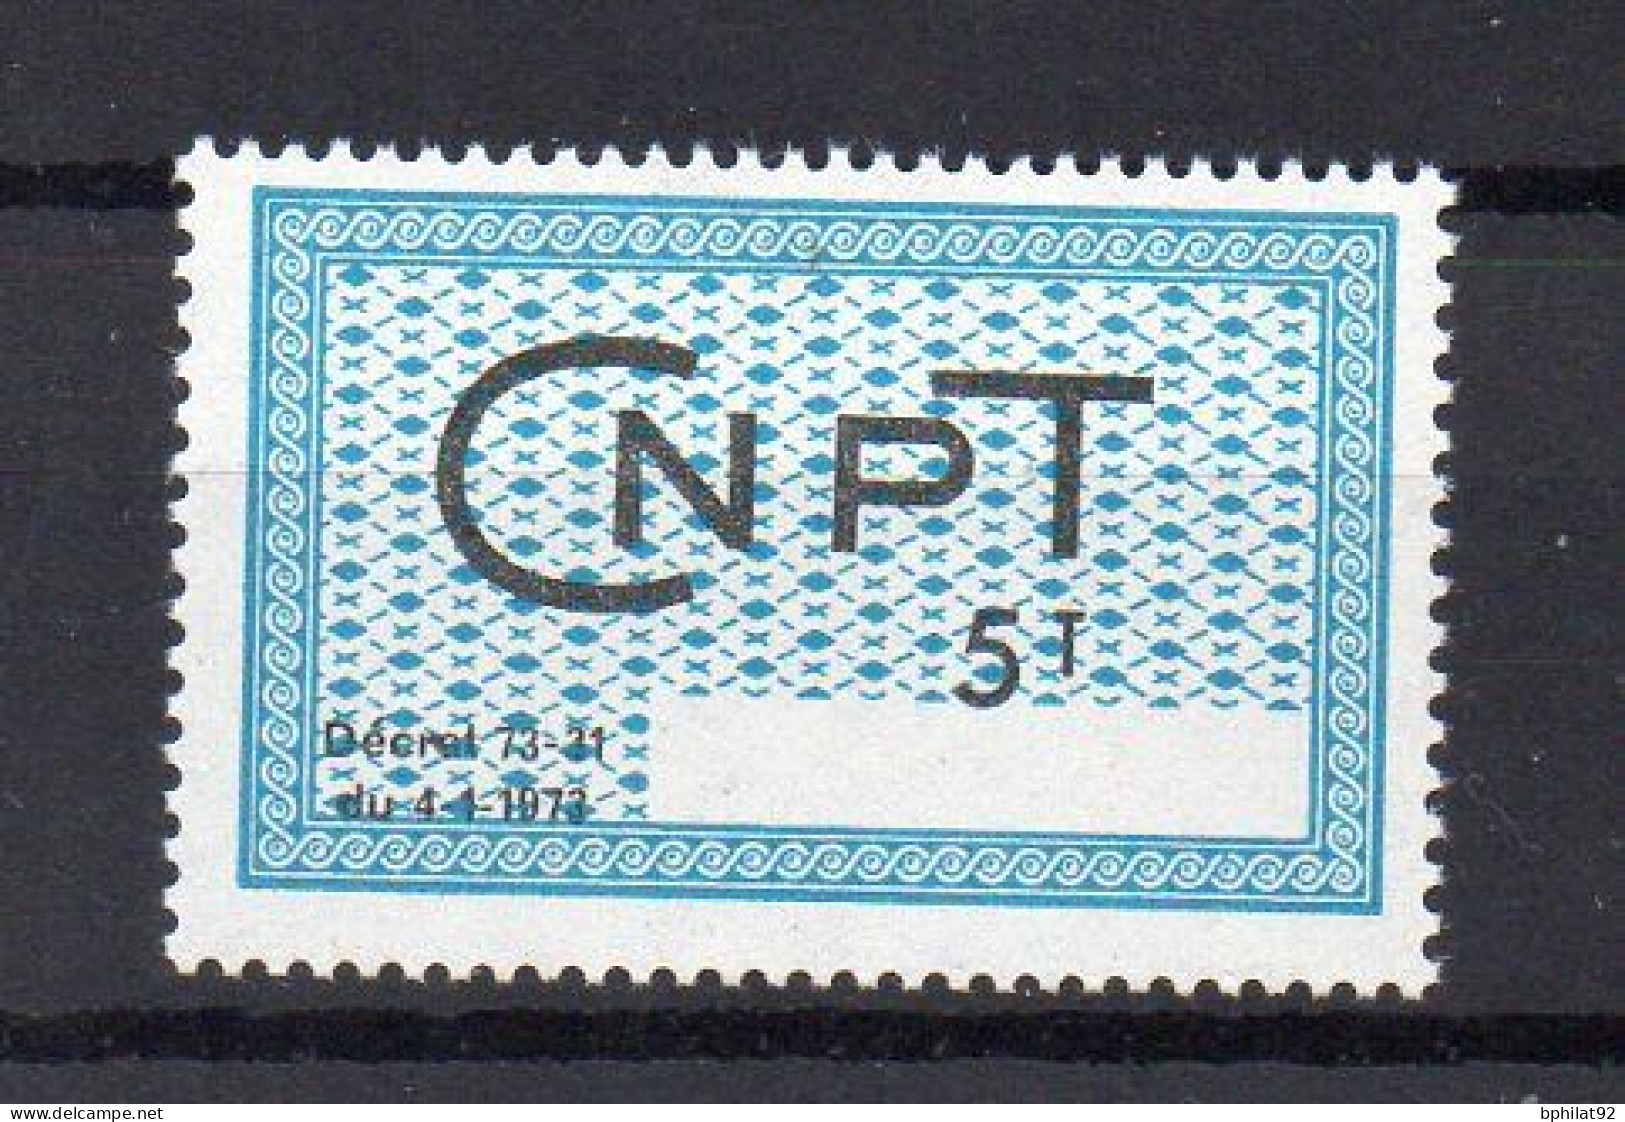 !!! FISCAL, POMME DE TERRE, N°5 NEUF ** - Timbres